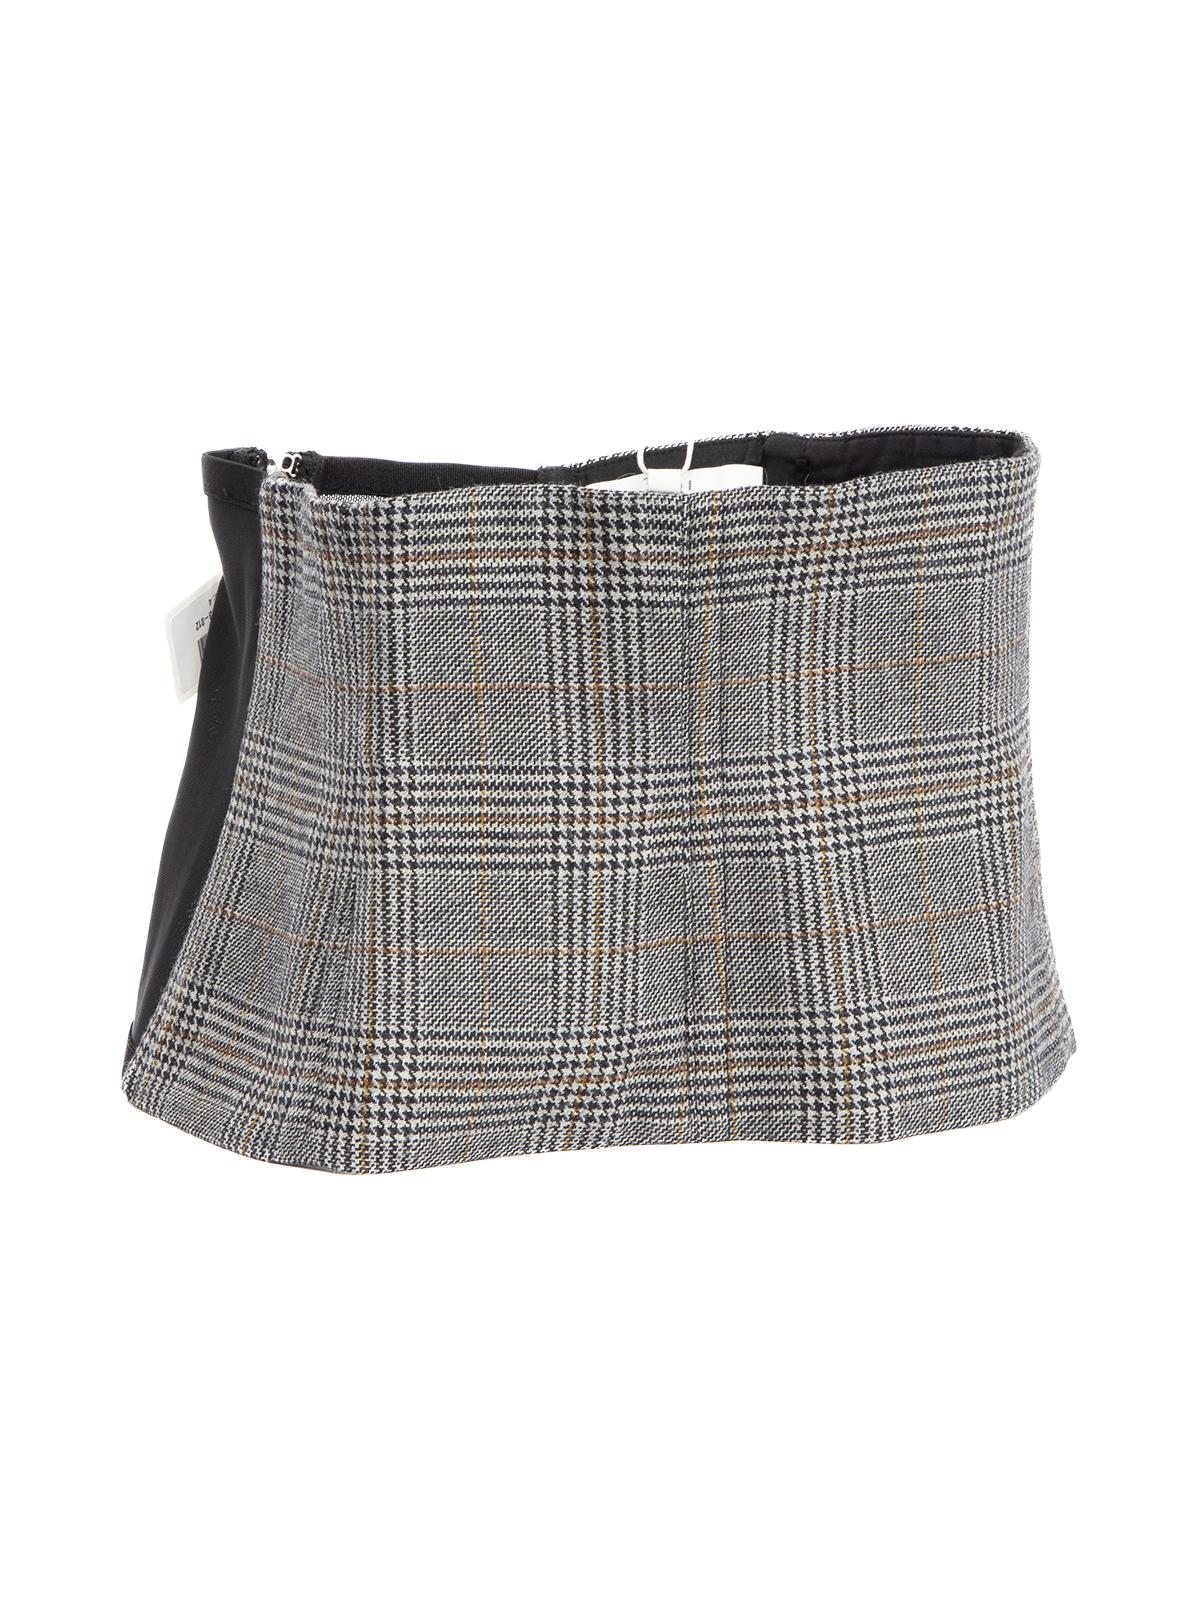 CONDITION is Never worn, with tags. No visible wear to corset belt is evident on this new Tibi designer resale item. Details Houndstooth Grey - black and white Mesh panels at back Zip fastening Made in China Composition 100% wool Lining 100% cotton